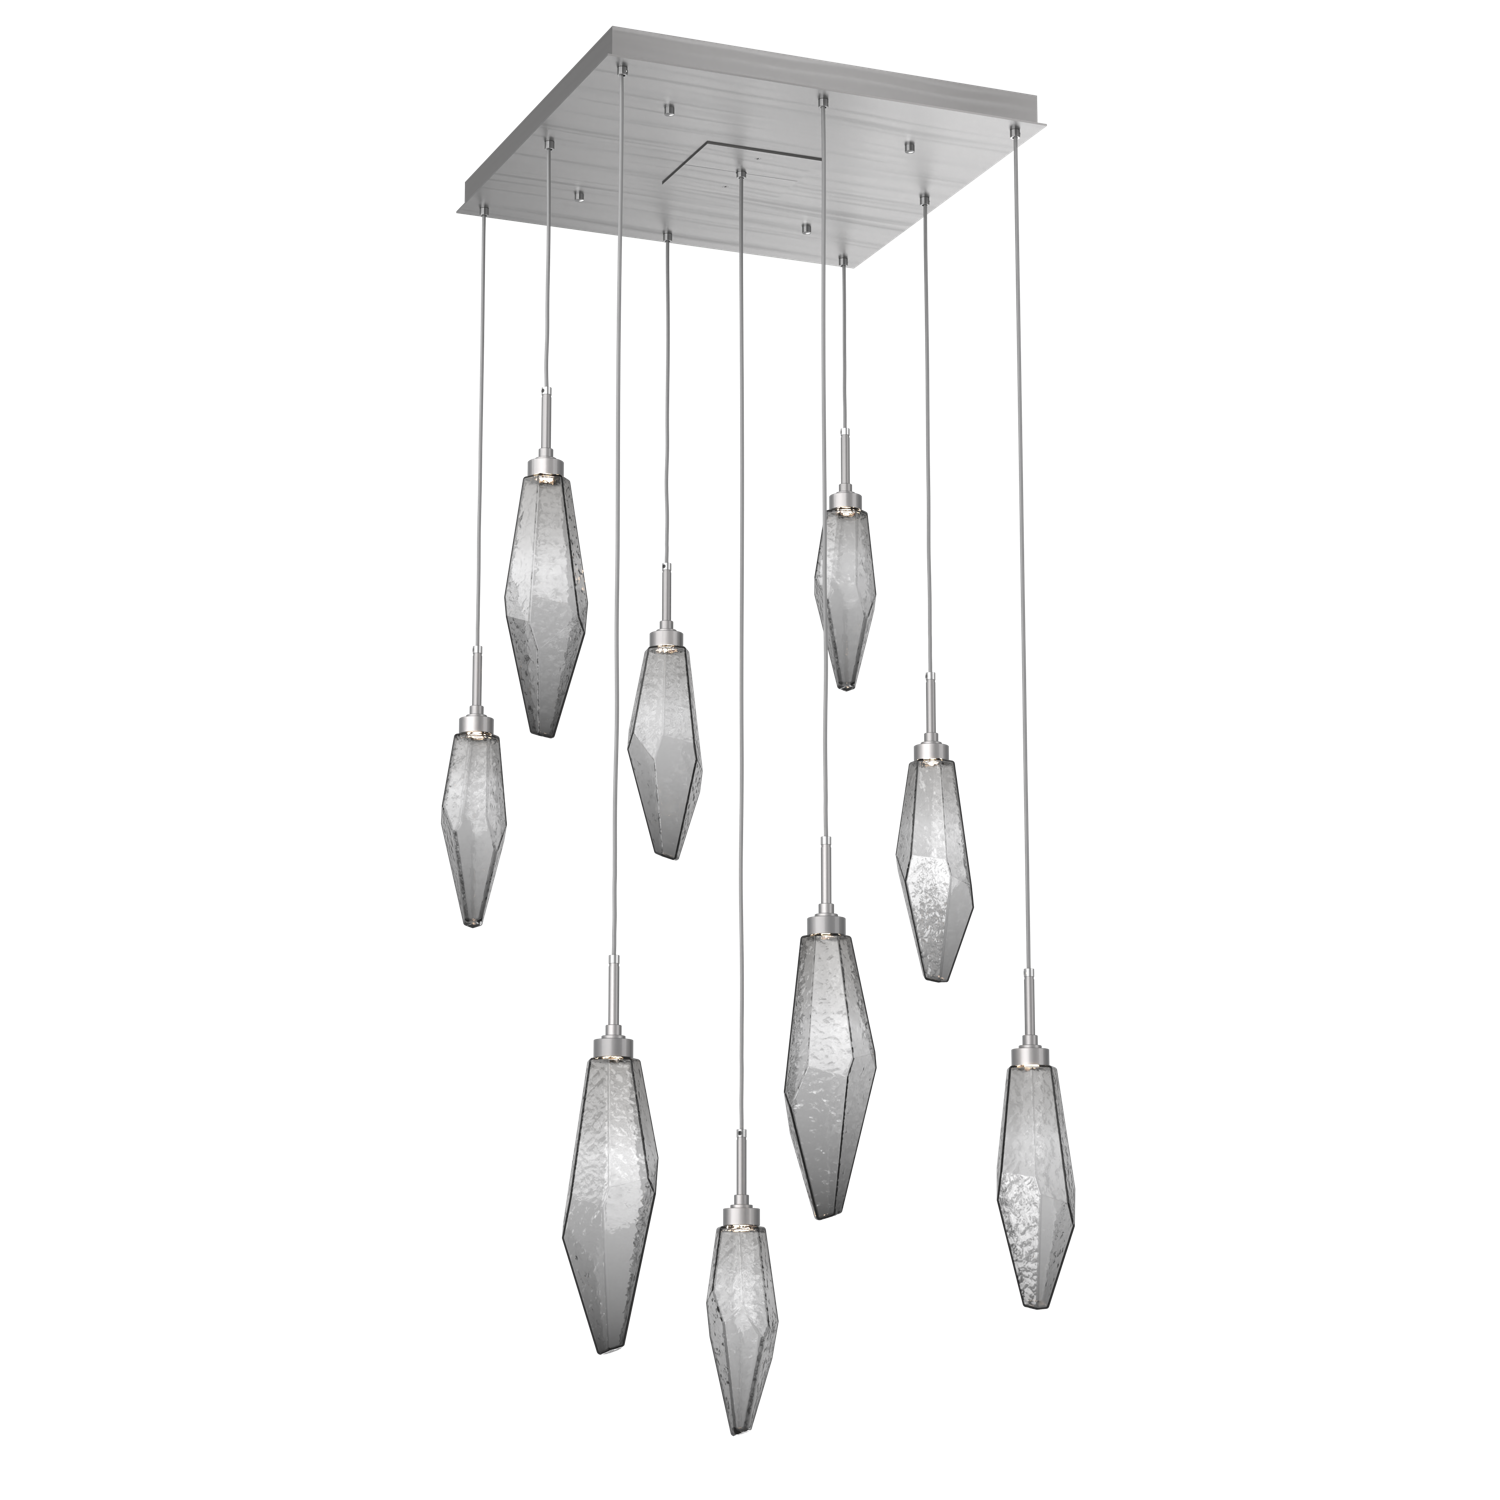 CHB0050-09-SN-CS-Hammerton-Studio-Rock-Crystal-9-light-square-pendant-chandelier-with-satin-nickel-finish-and-chilled-smoke-glass-shades-and-LED-lamping